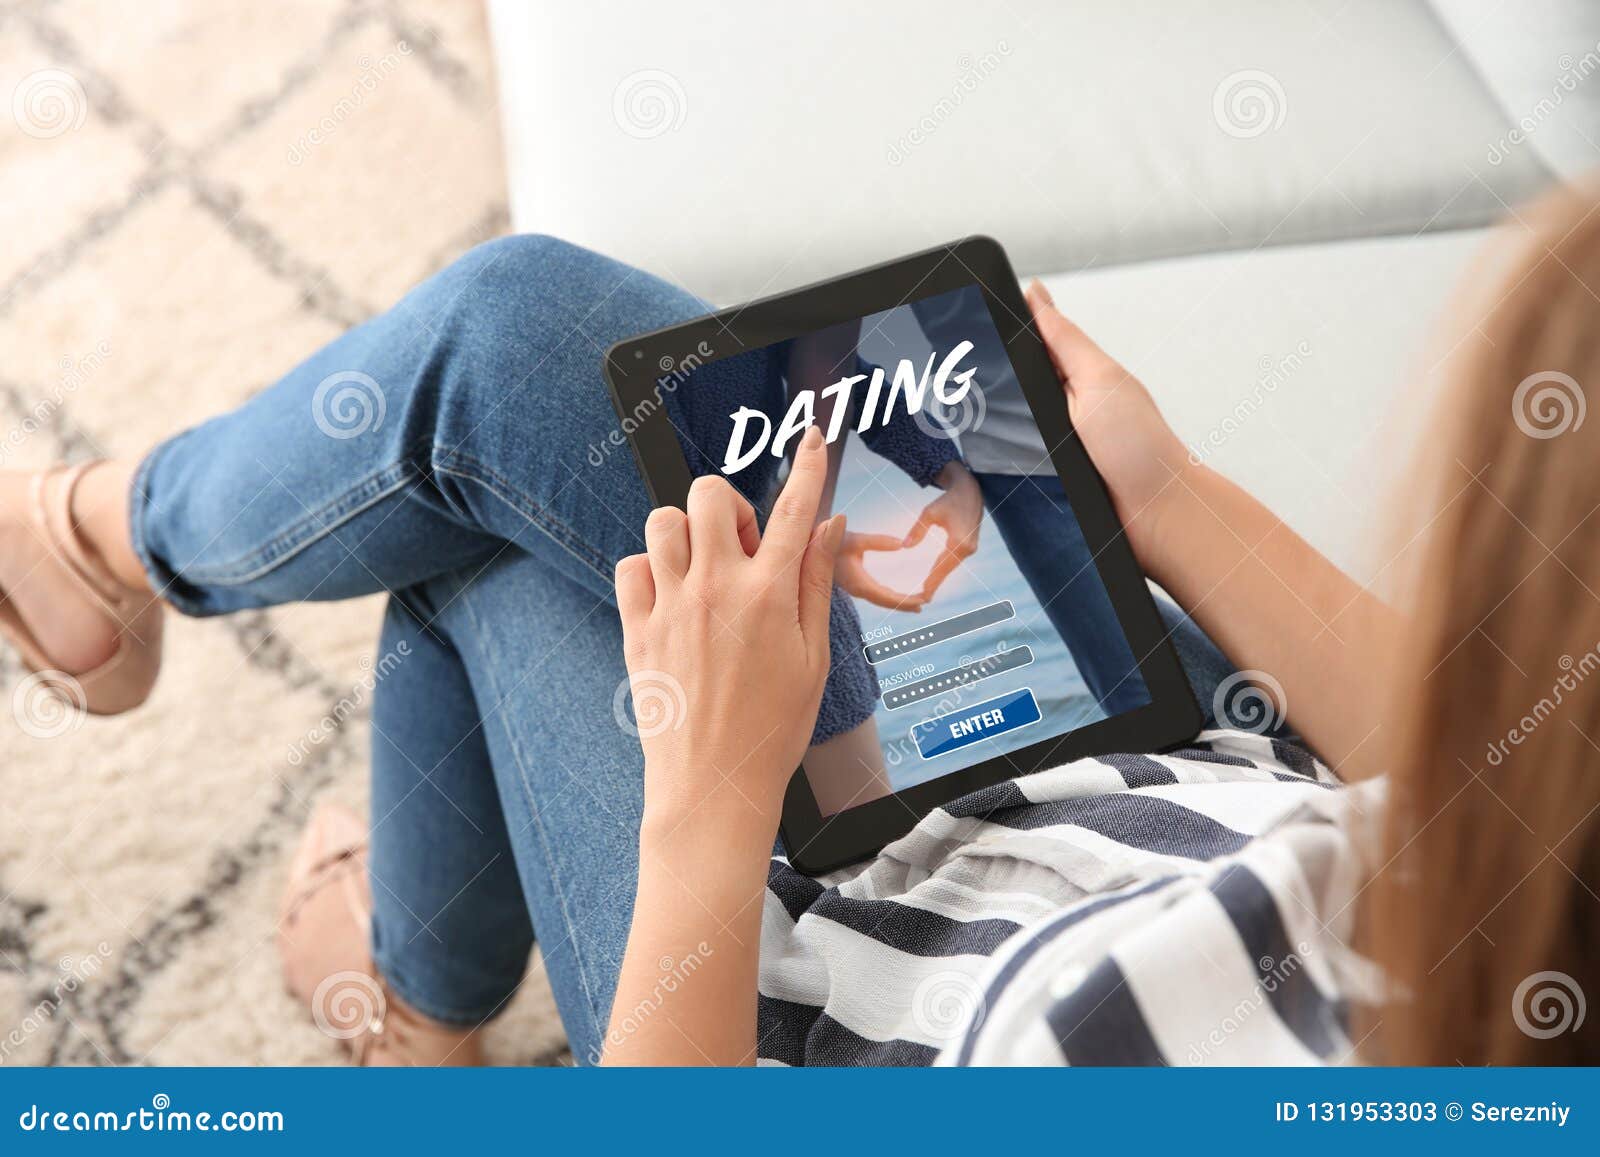 yahoo dating site